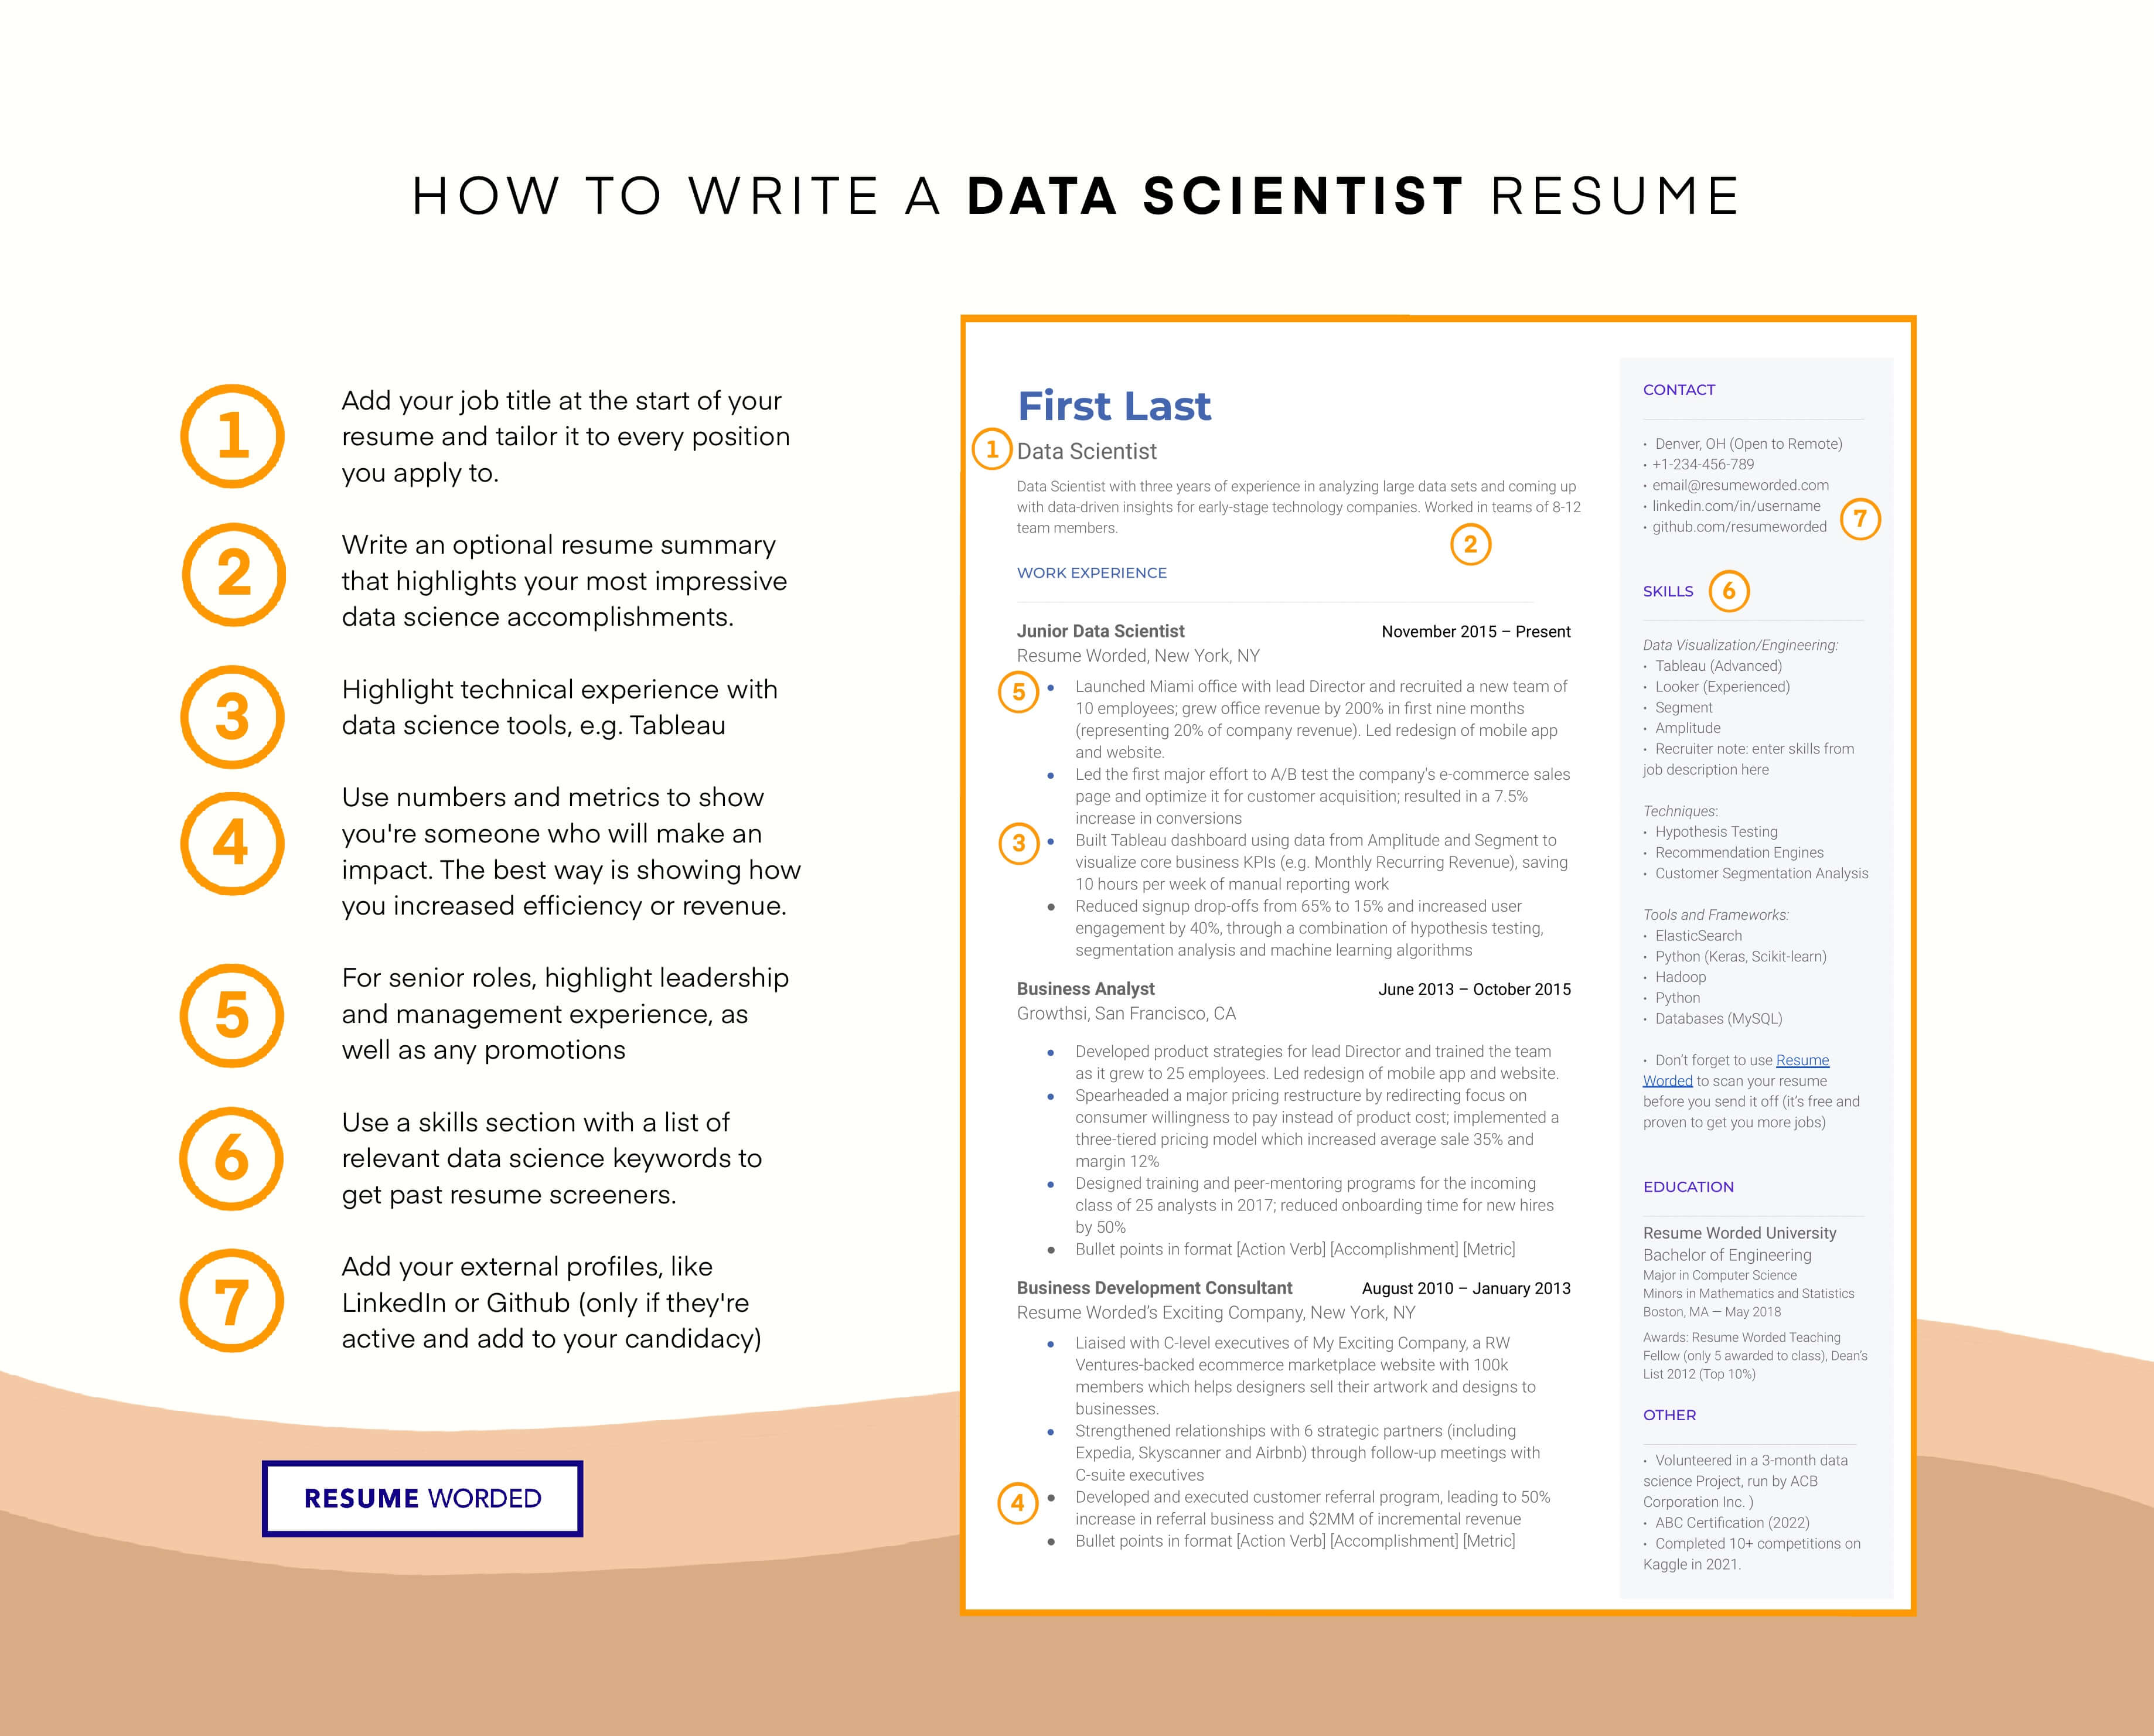 Include your data science certifications on your resume. - Data Science Manager Resume